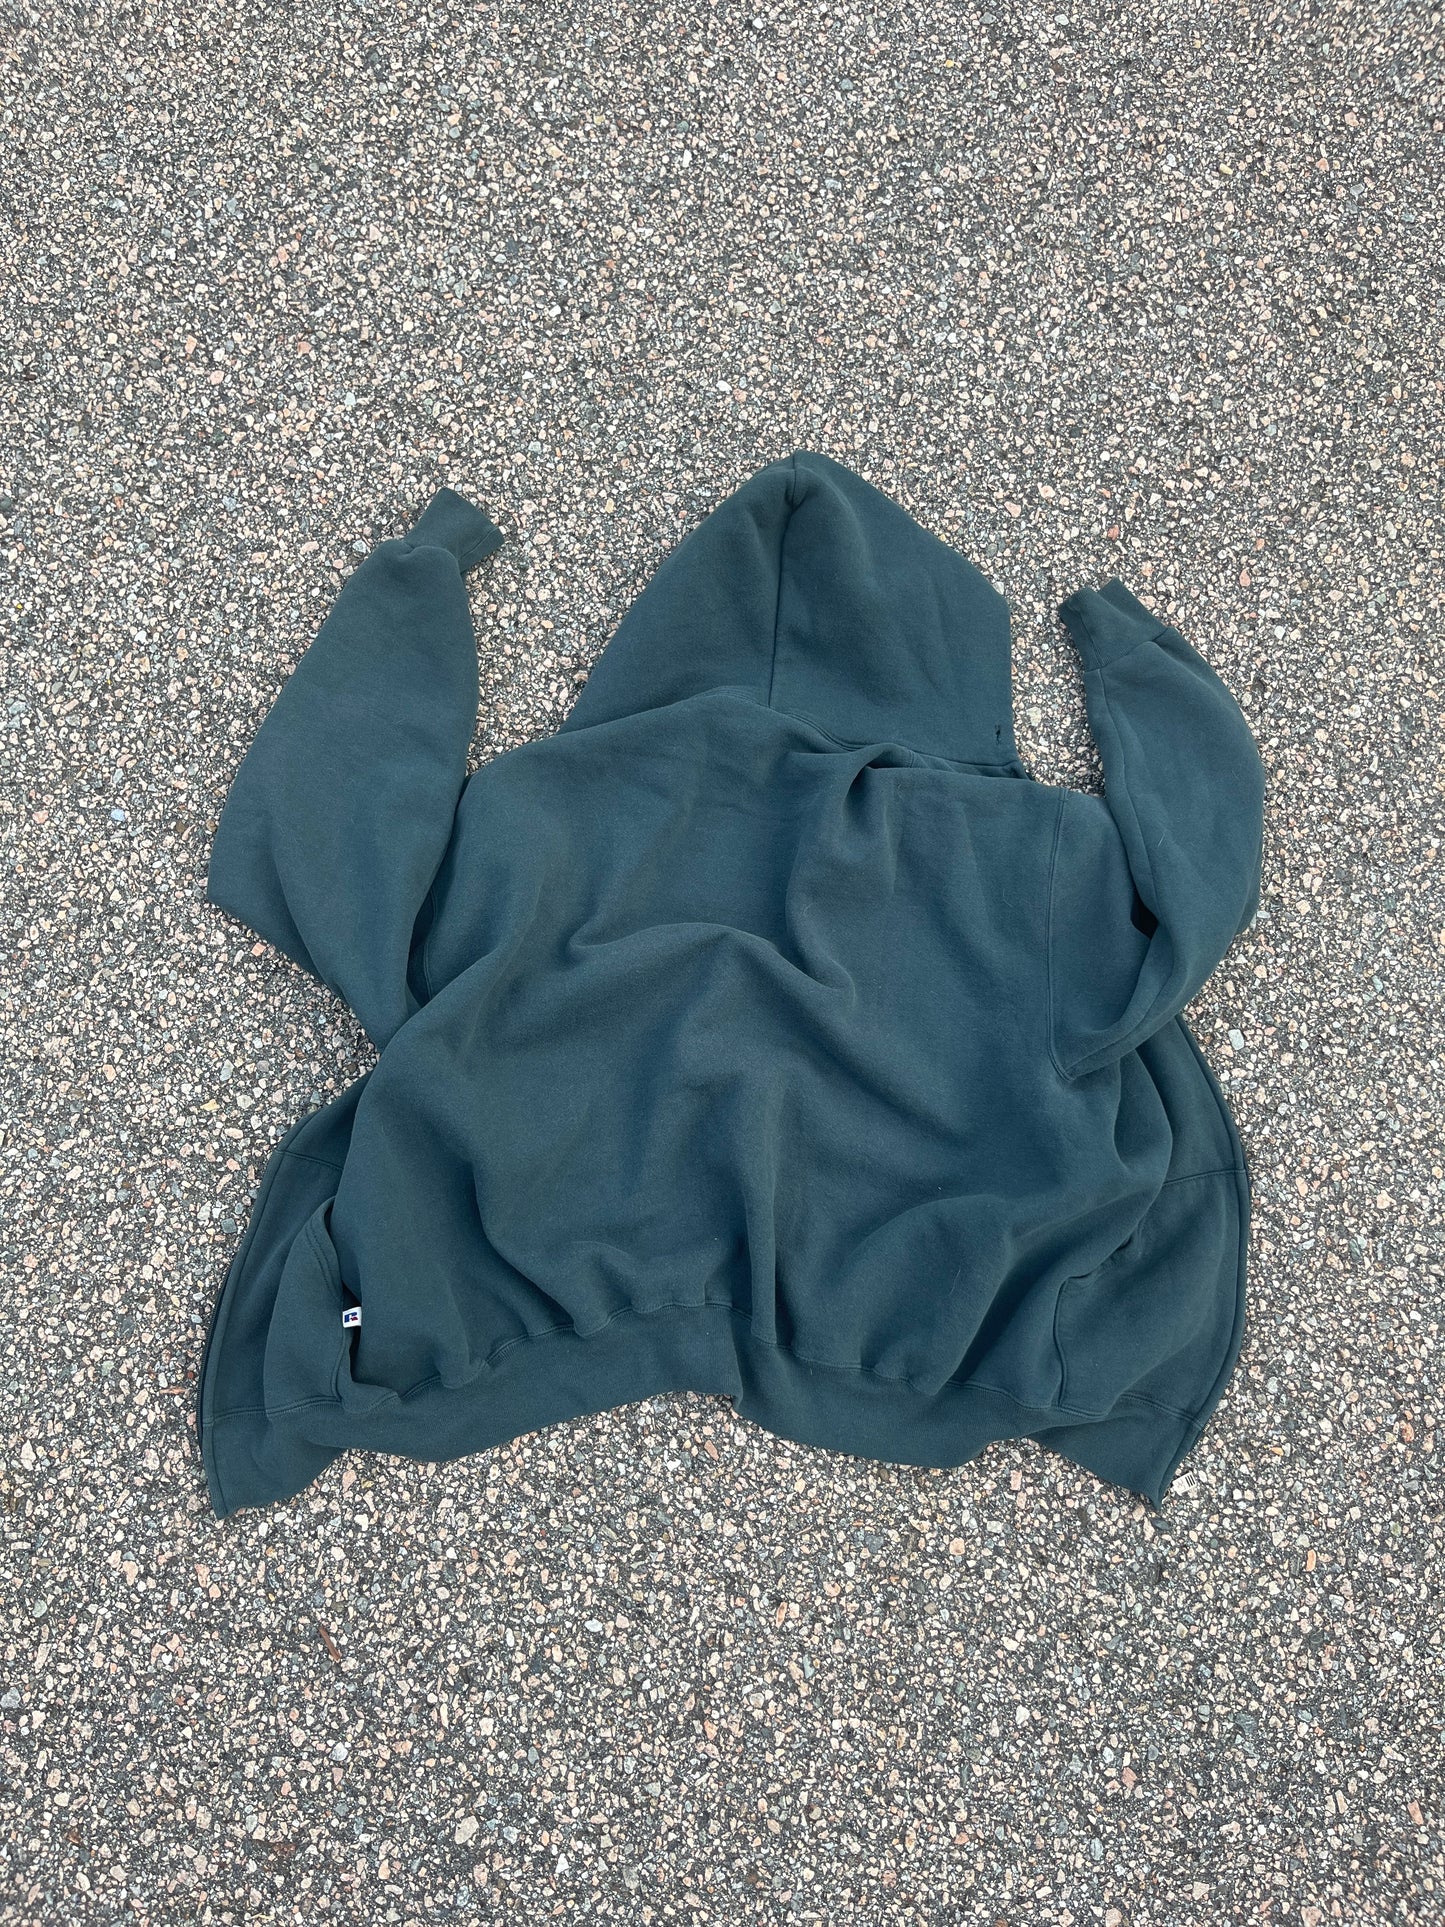 90’s Faded Hunter Green Russell Hoodie - XL